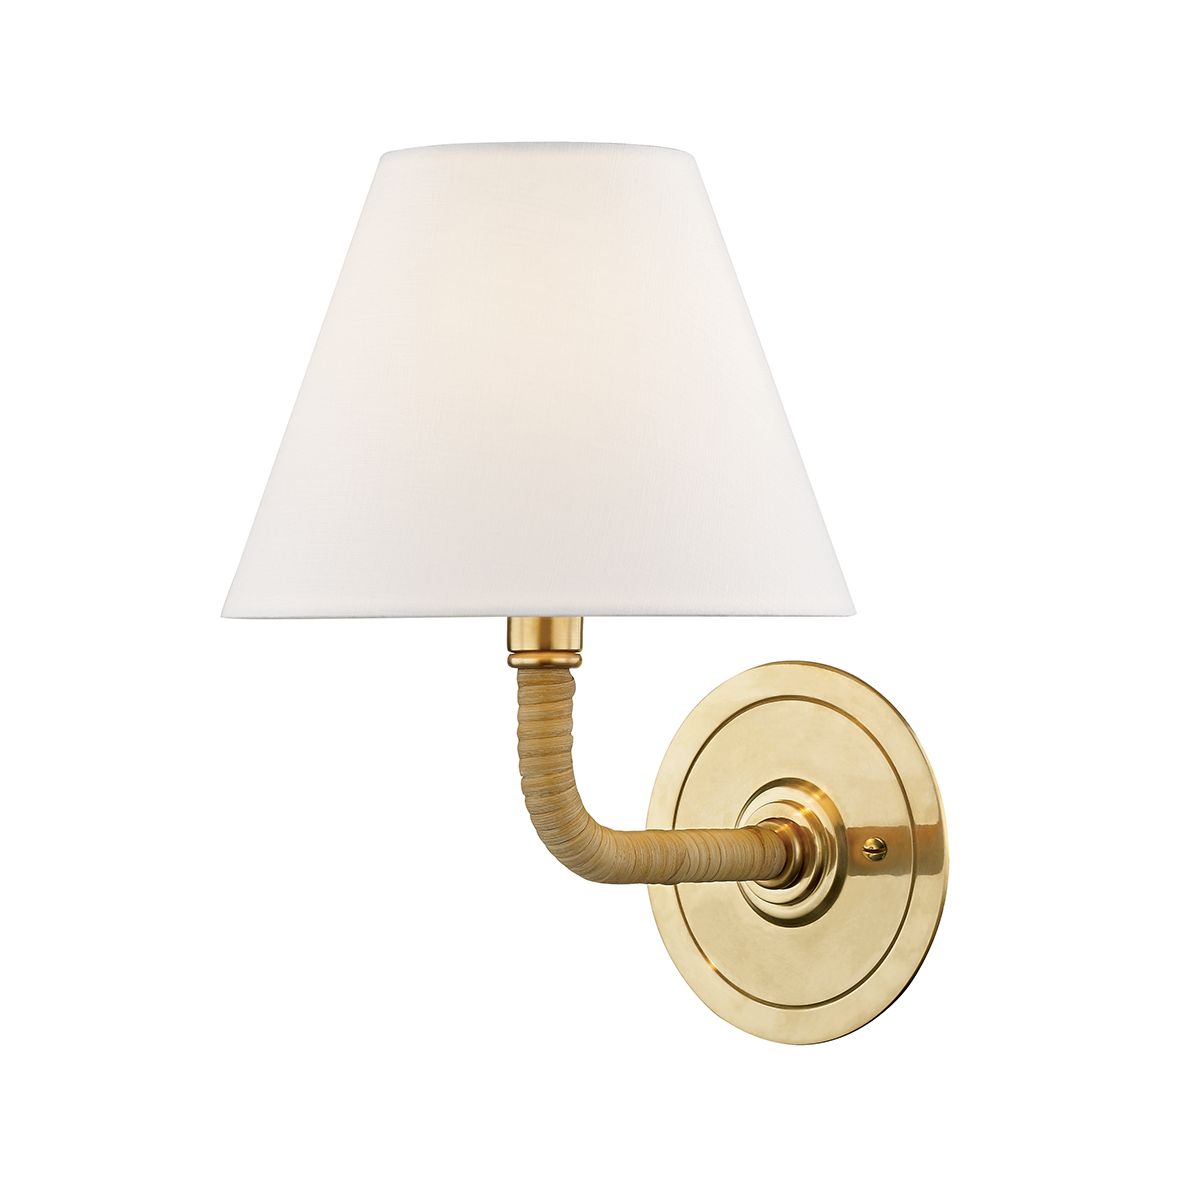 Curves No.1 11 in. Armed Sconce Brass finish